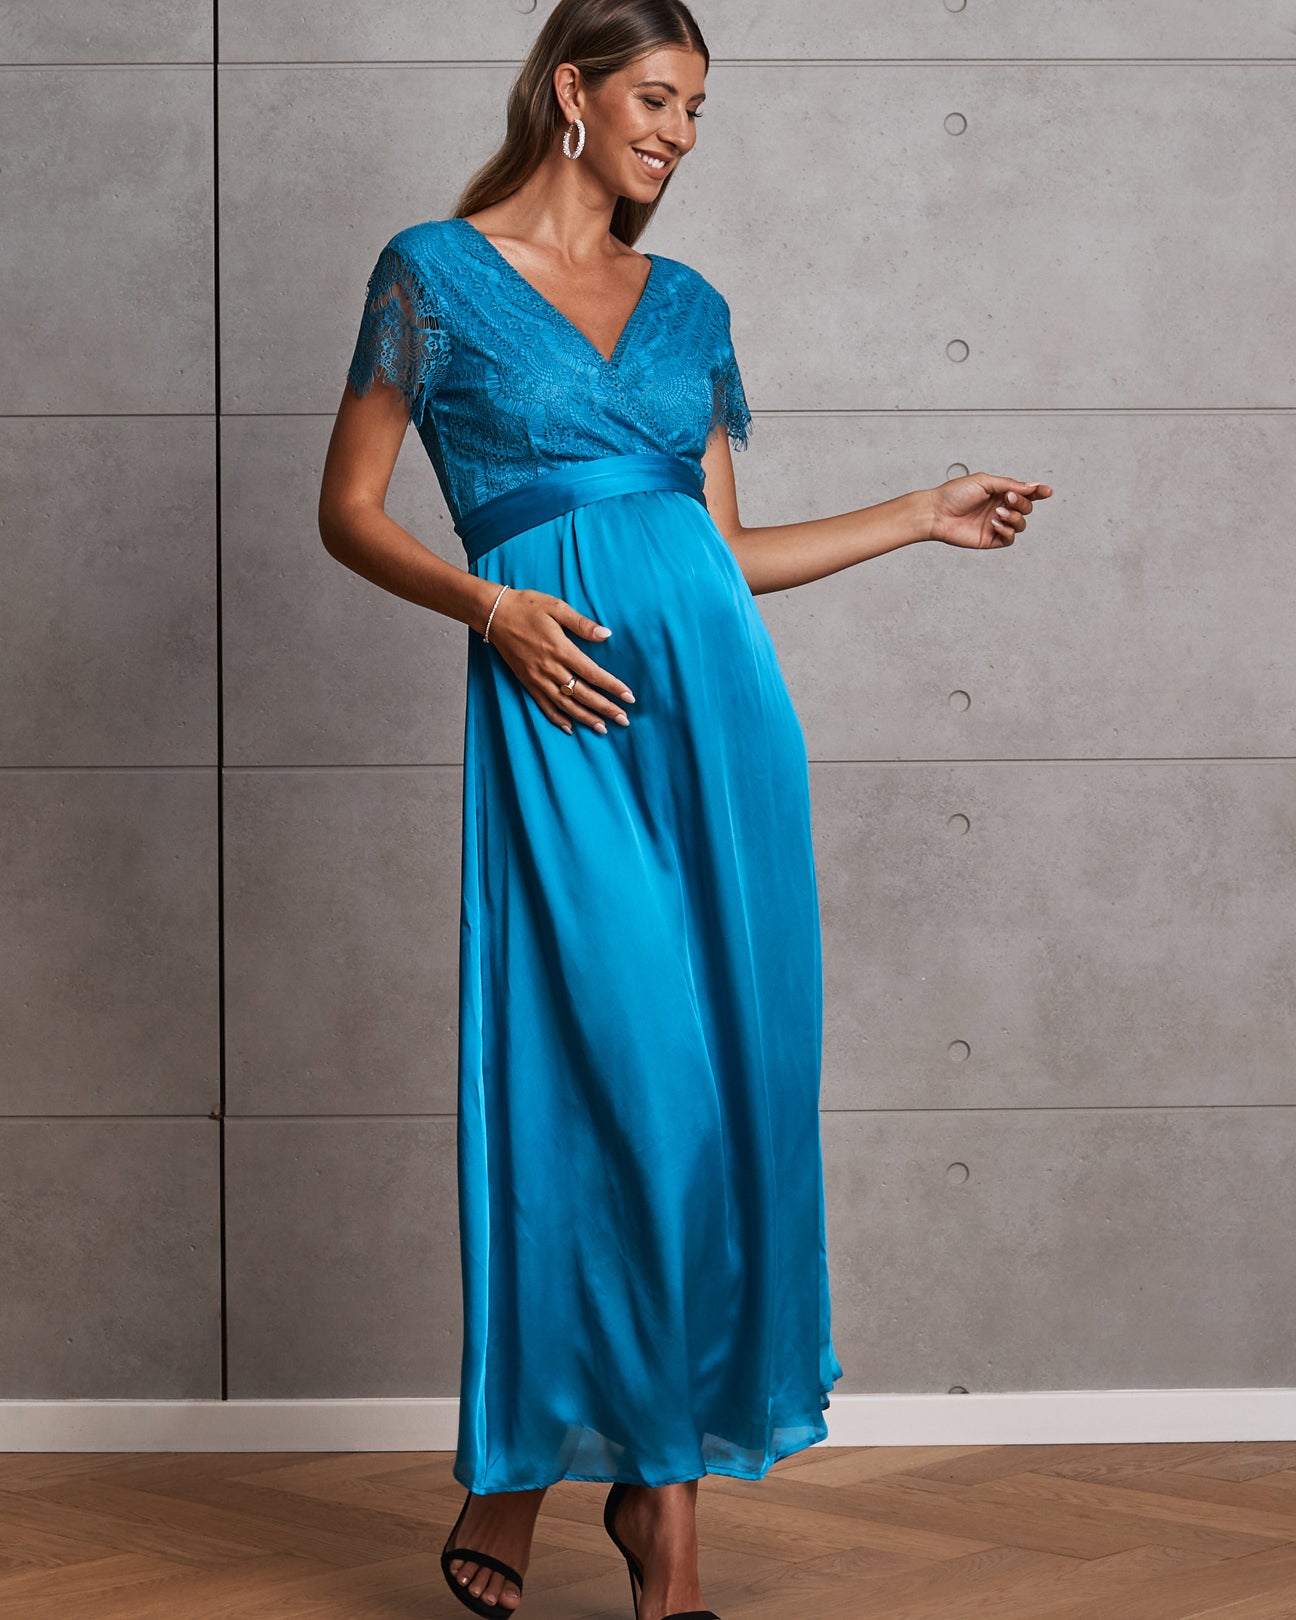 Anya Maternity Formal Party Lace Dress - Blue - Angel Maternity - Maternity clothes